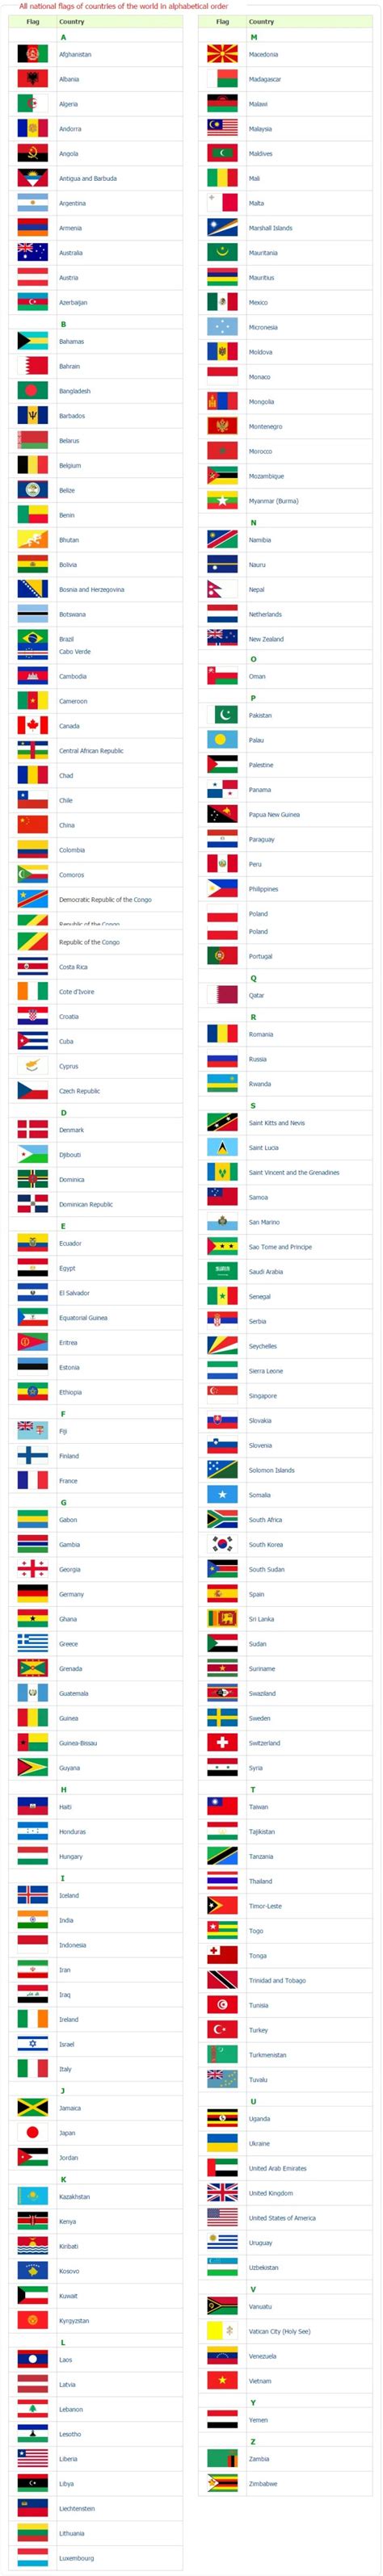 All Flags In Alphabetical Order